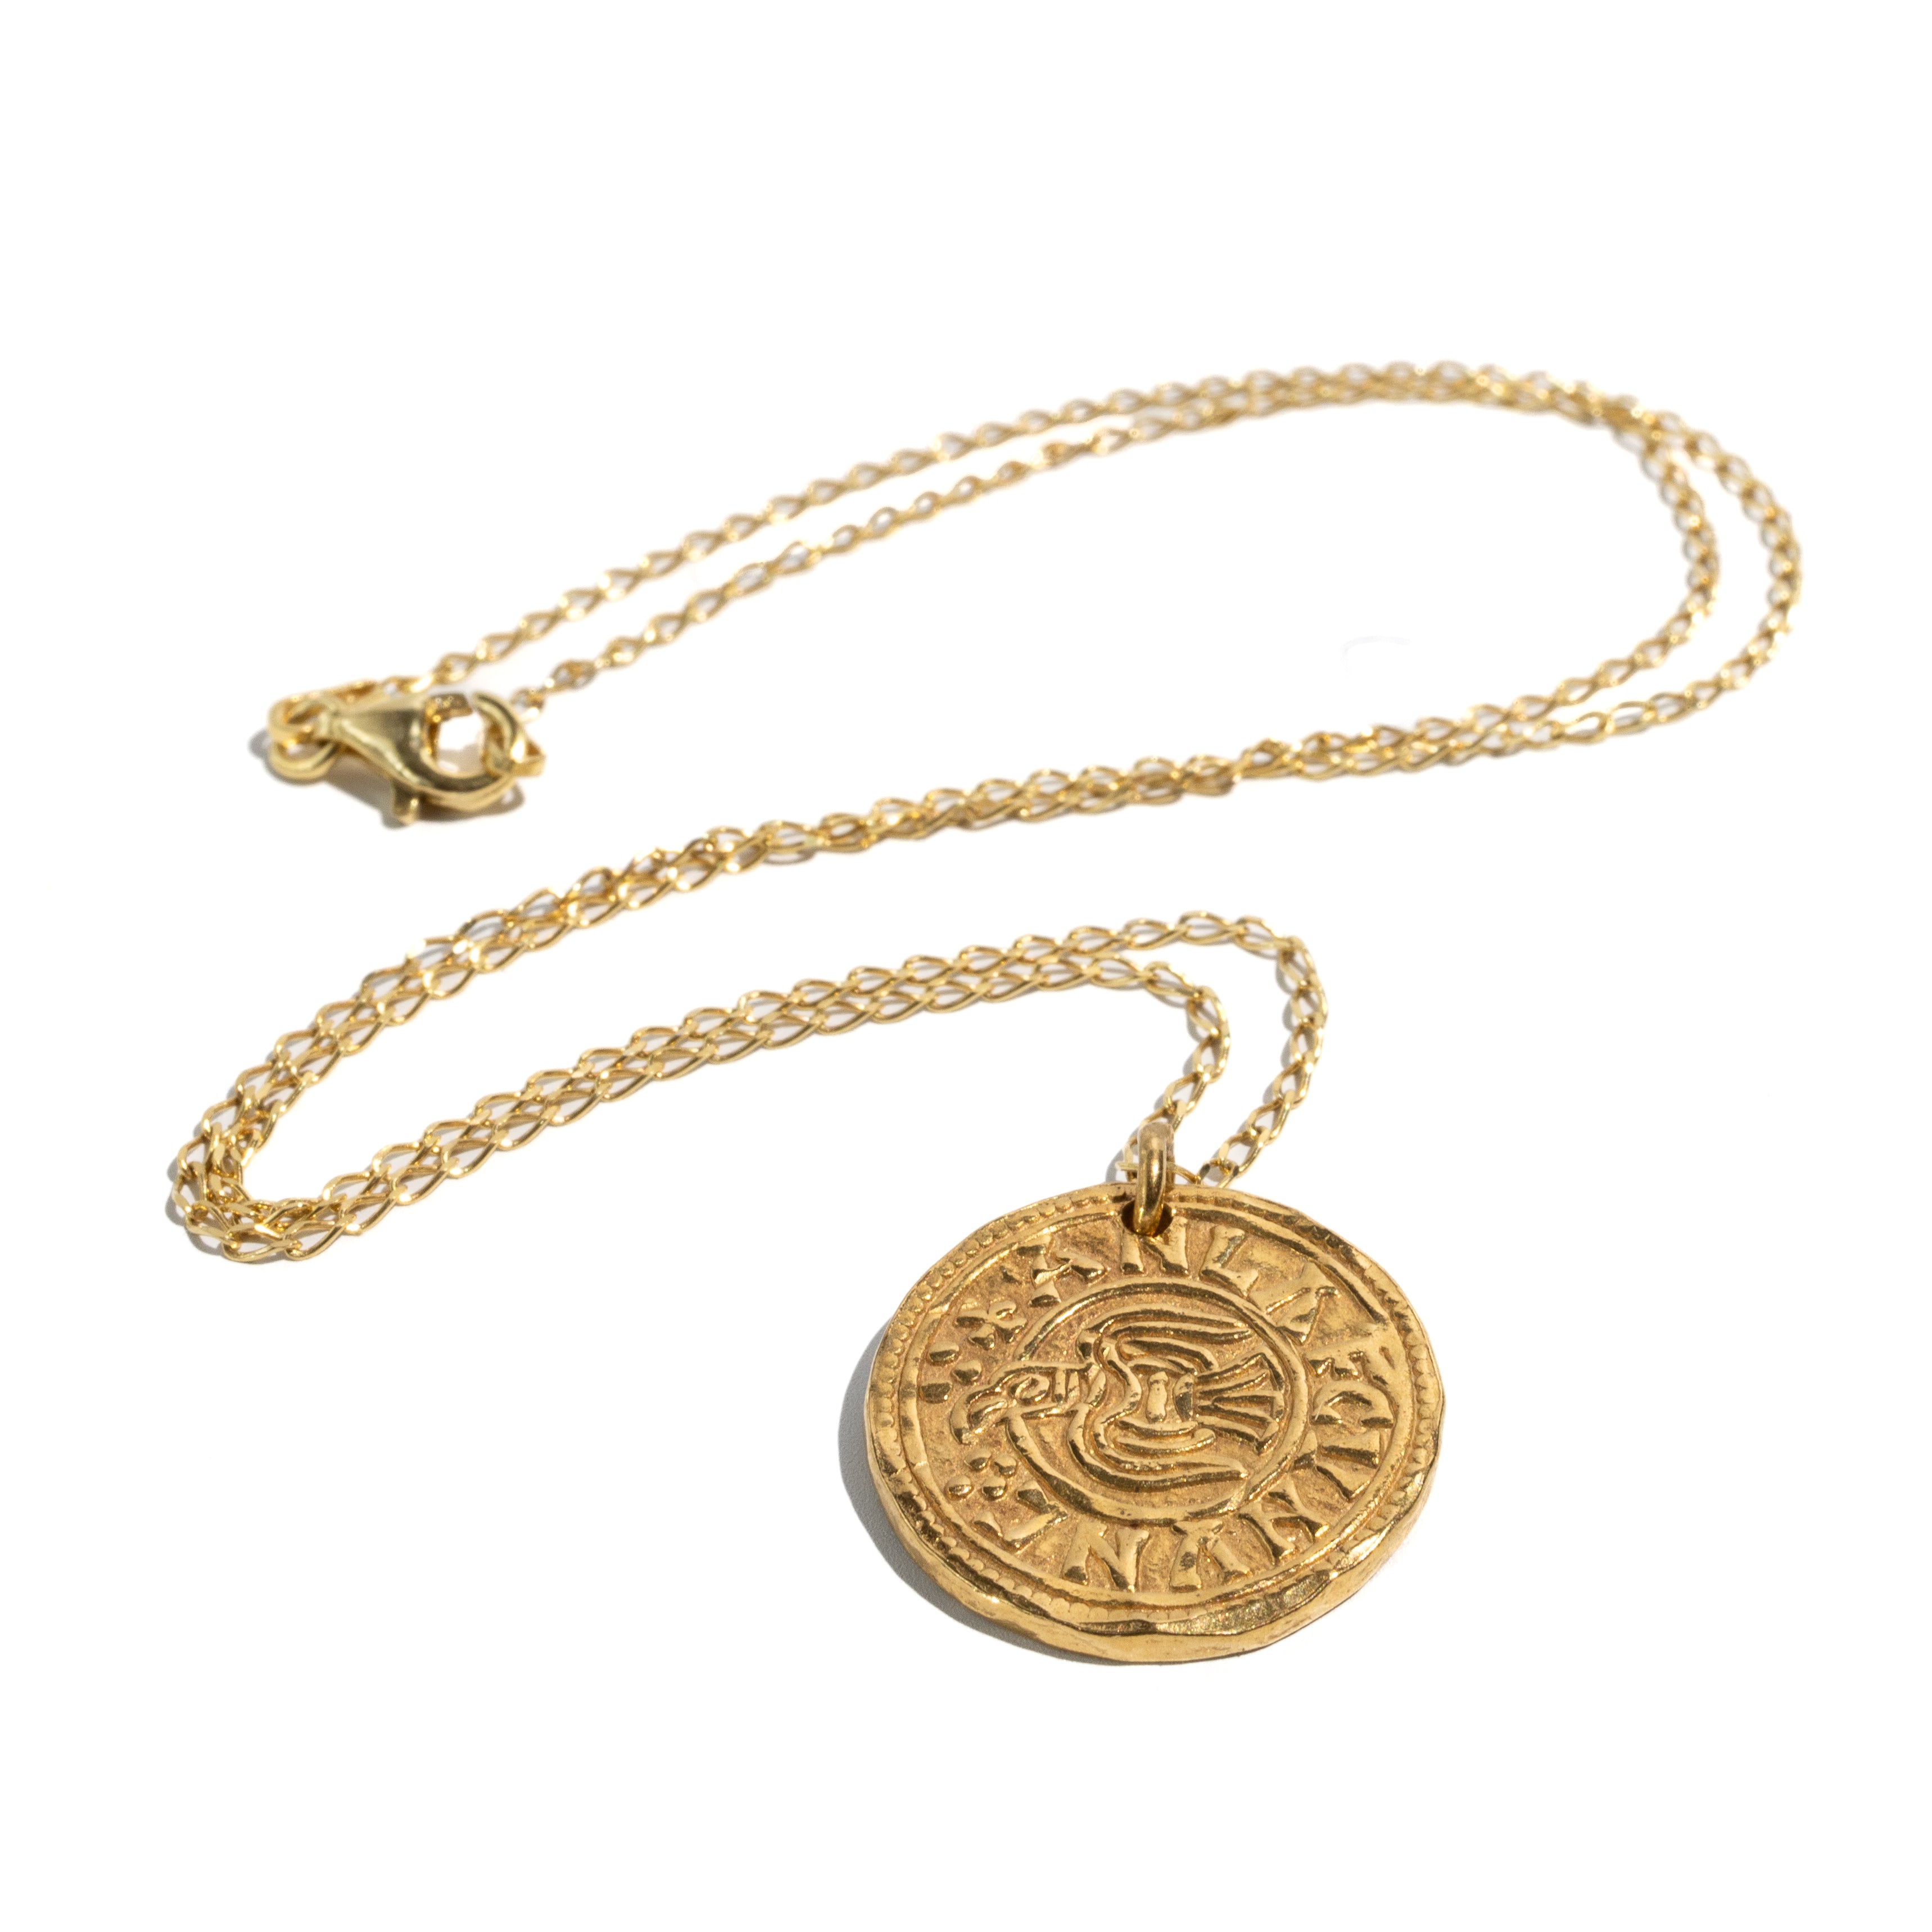 Penny Raven Coin - gold plated sterling silver